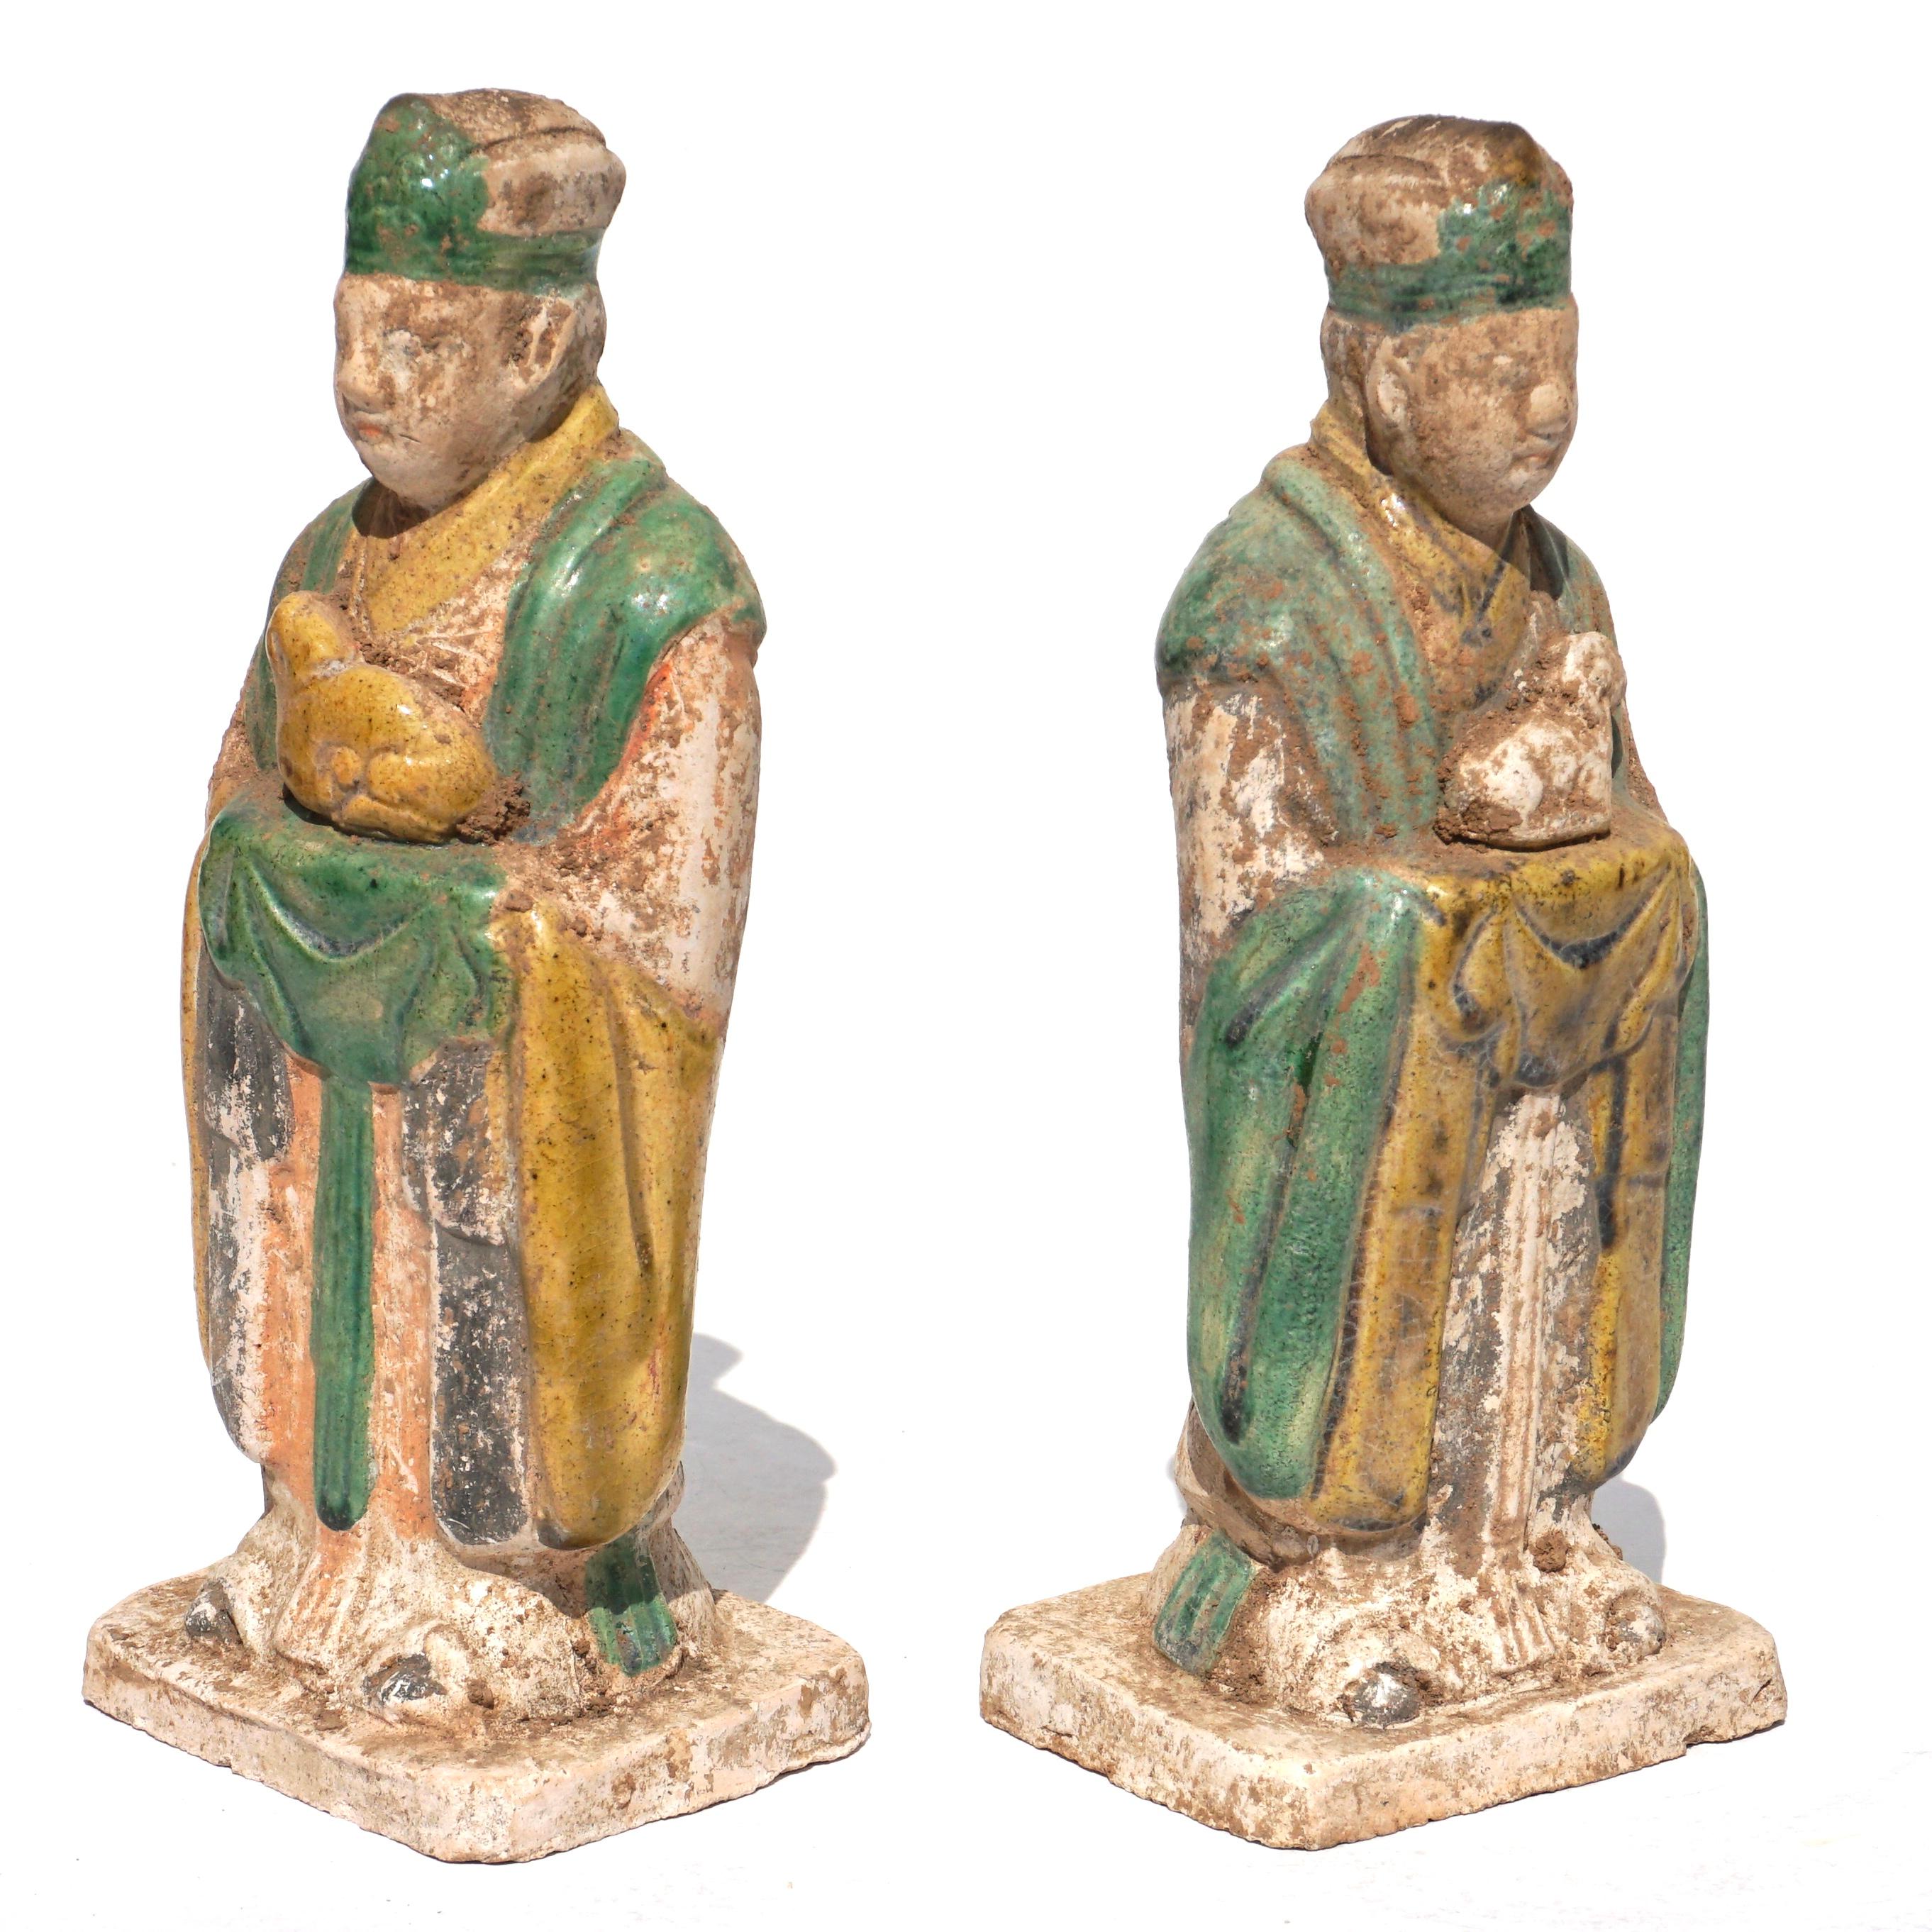 Ca. 1368-1644 AD. Ming Dynasty. 

A fabulous set of two mould-made, glazed ceramic zodiac figures. Each wearing long draping gowns of rich green, yellow and orange hues. Each figure holding a an animal of the Chinese zodiac, a rabbit and a sheep in